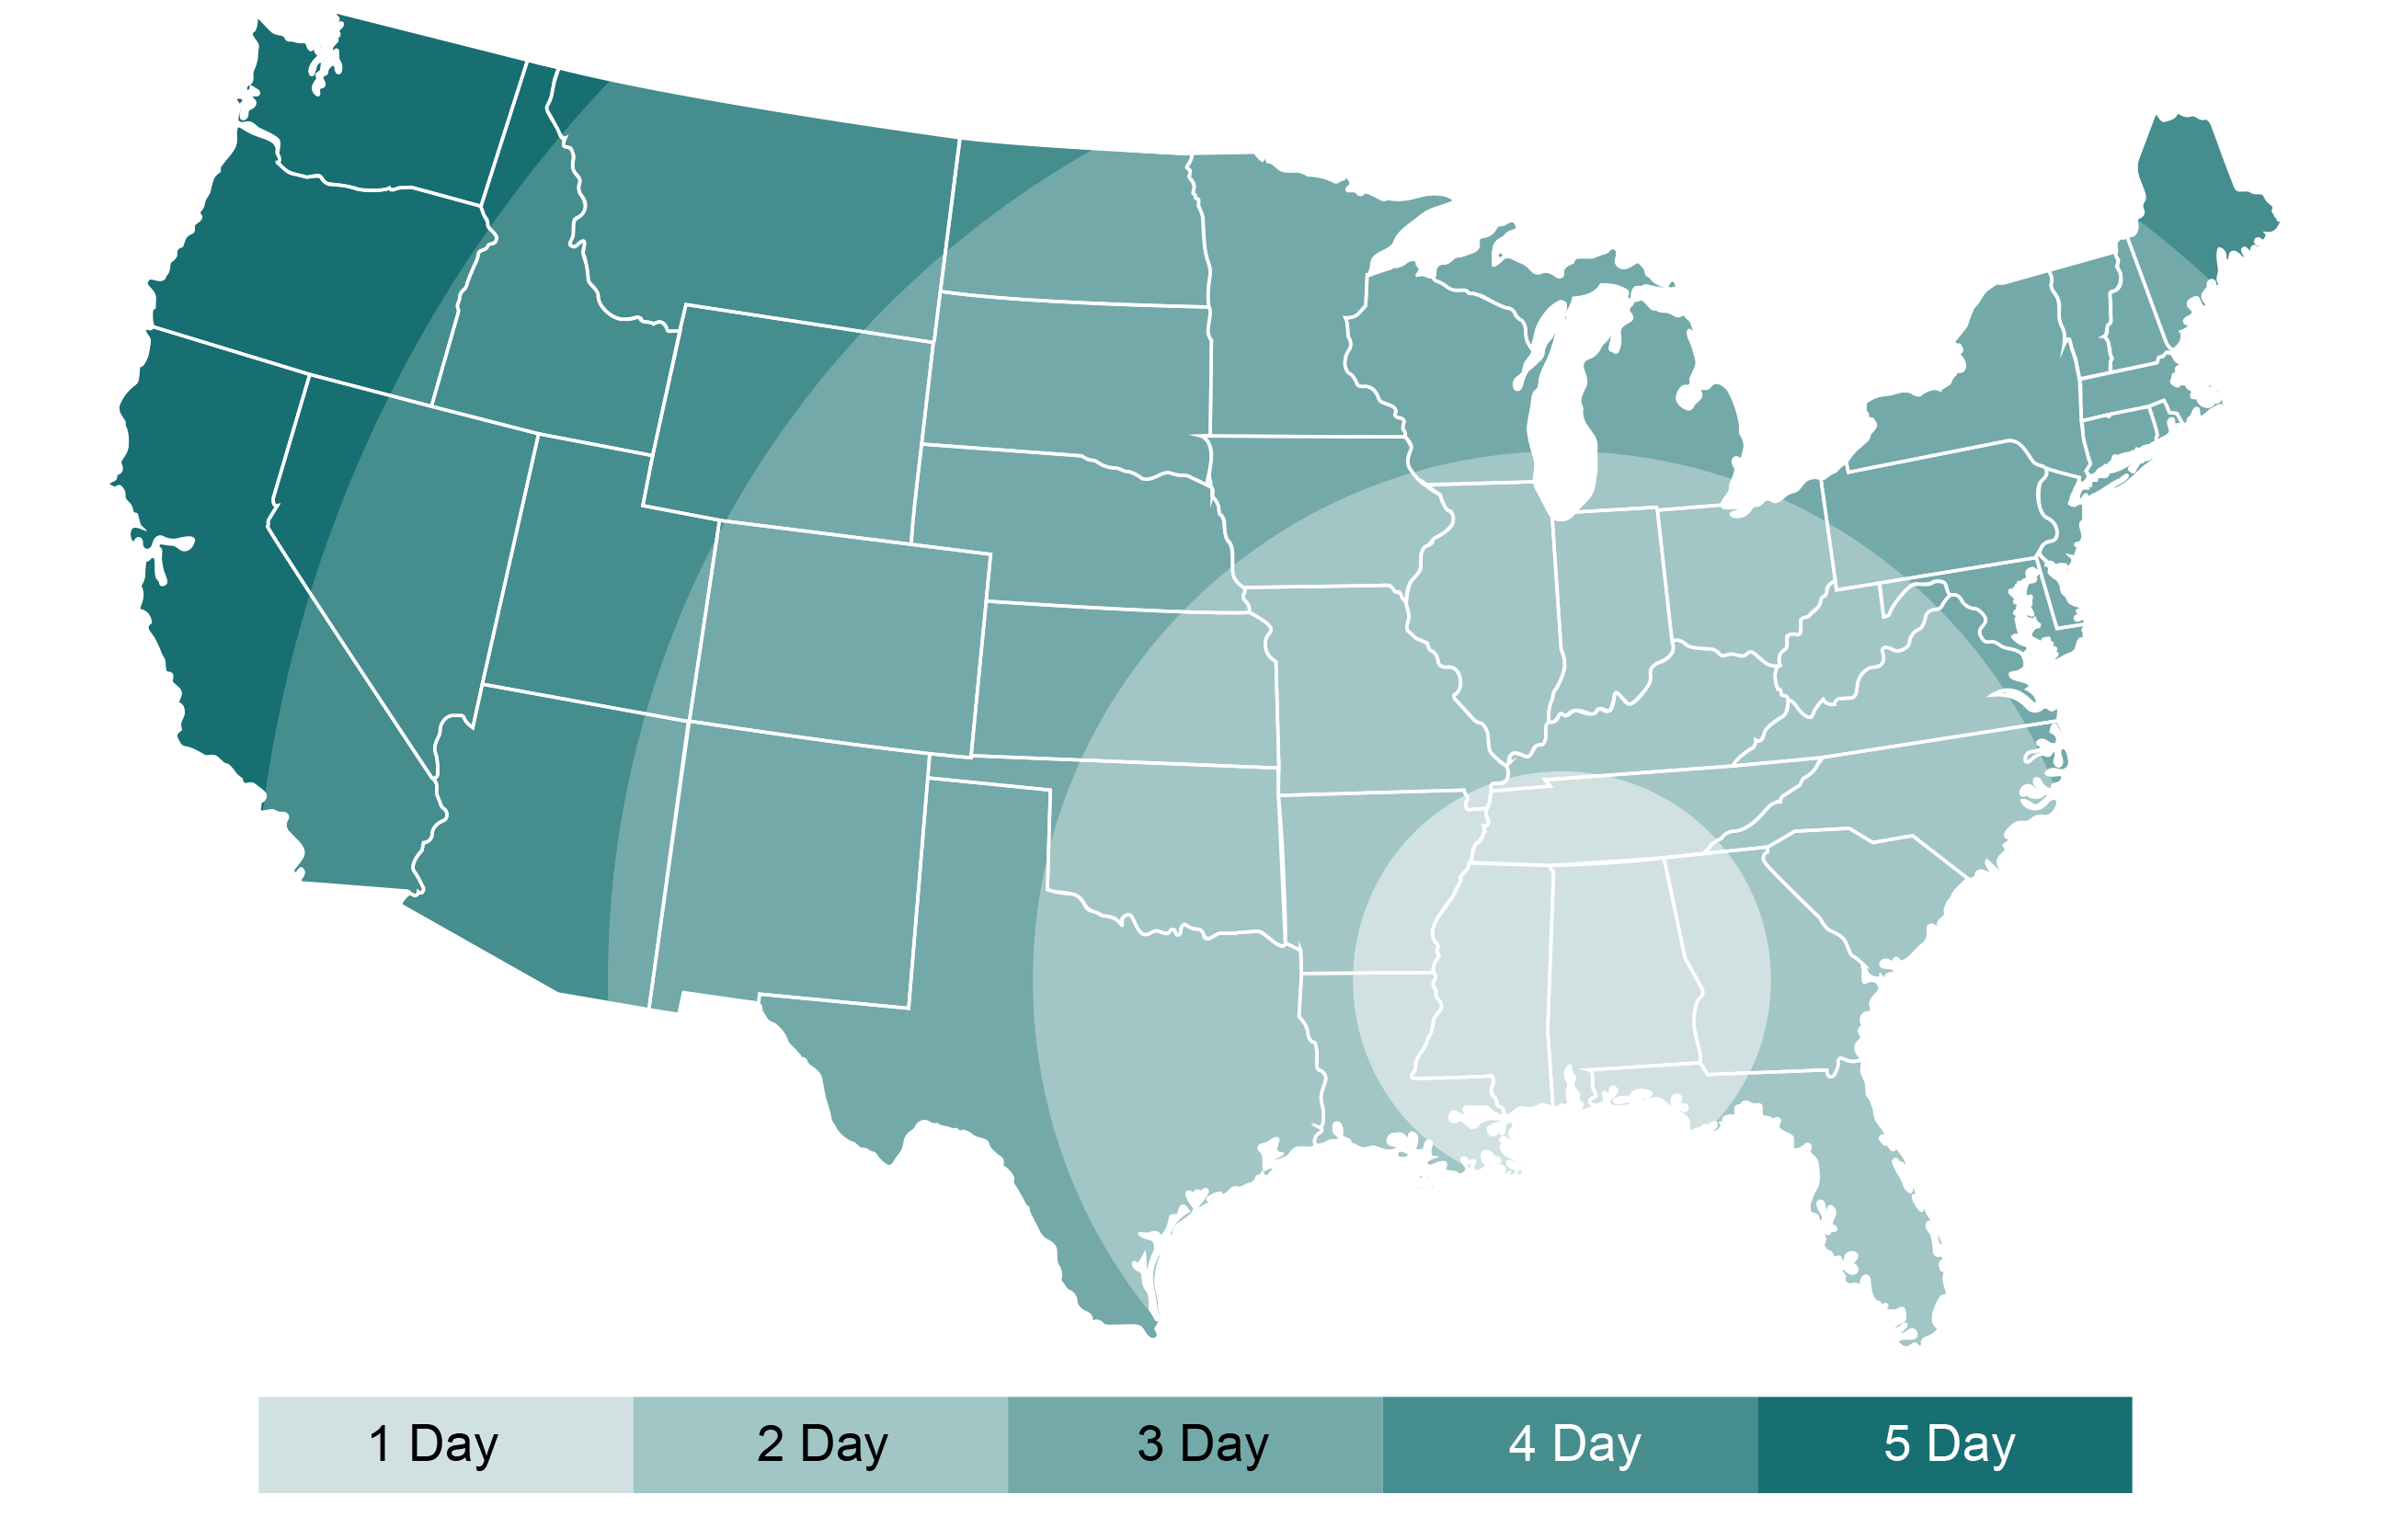 Shipping time estimate map